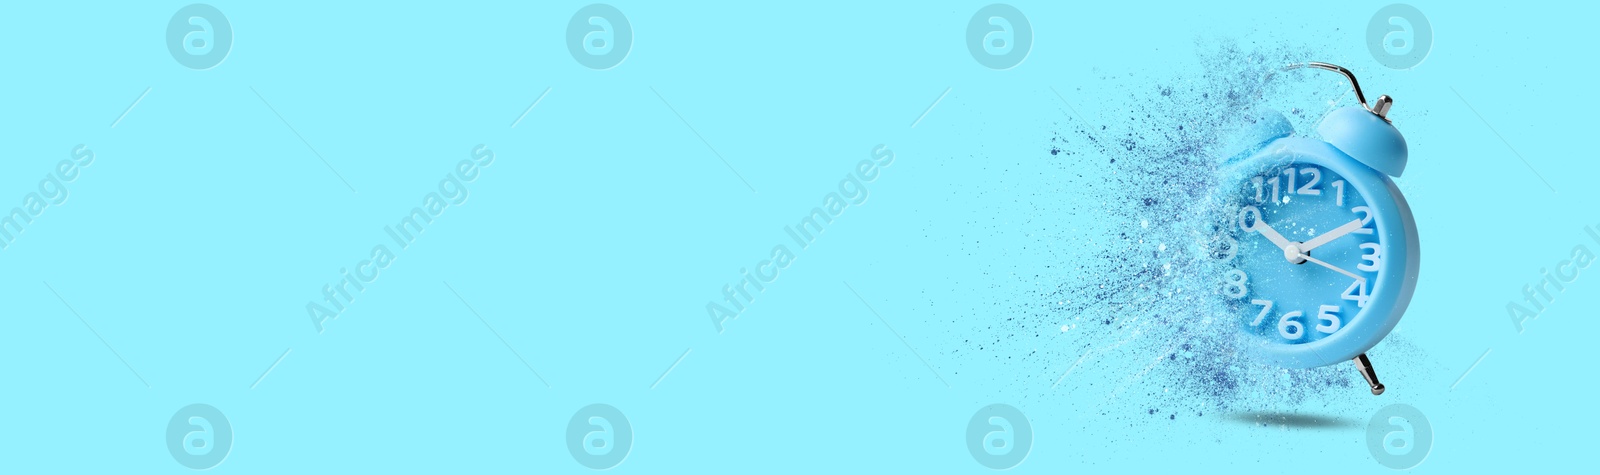 Image of Alarm clock dissolving on light blue background, banner design with space for text. Flow of time